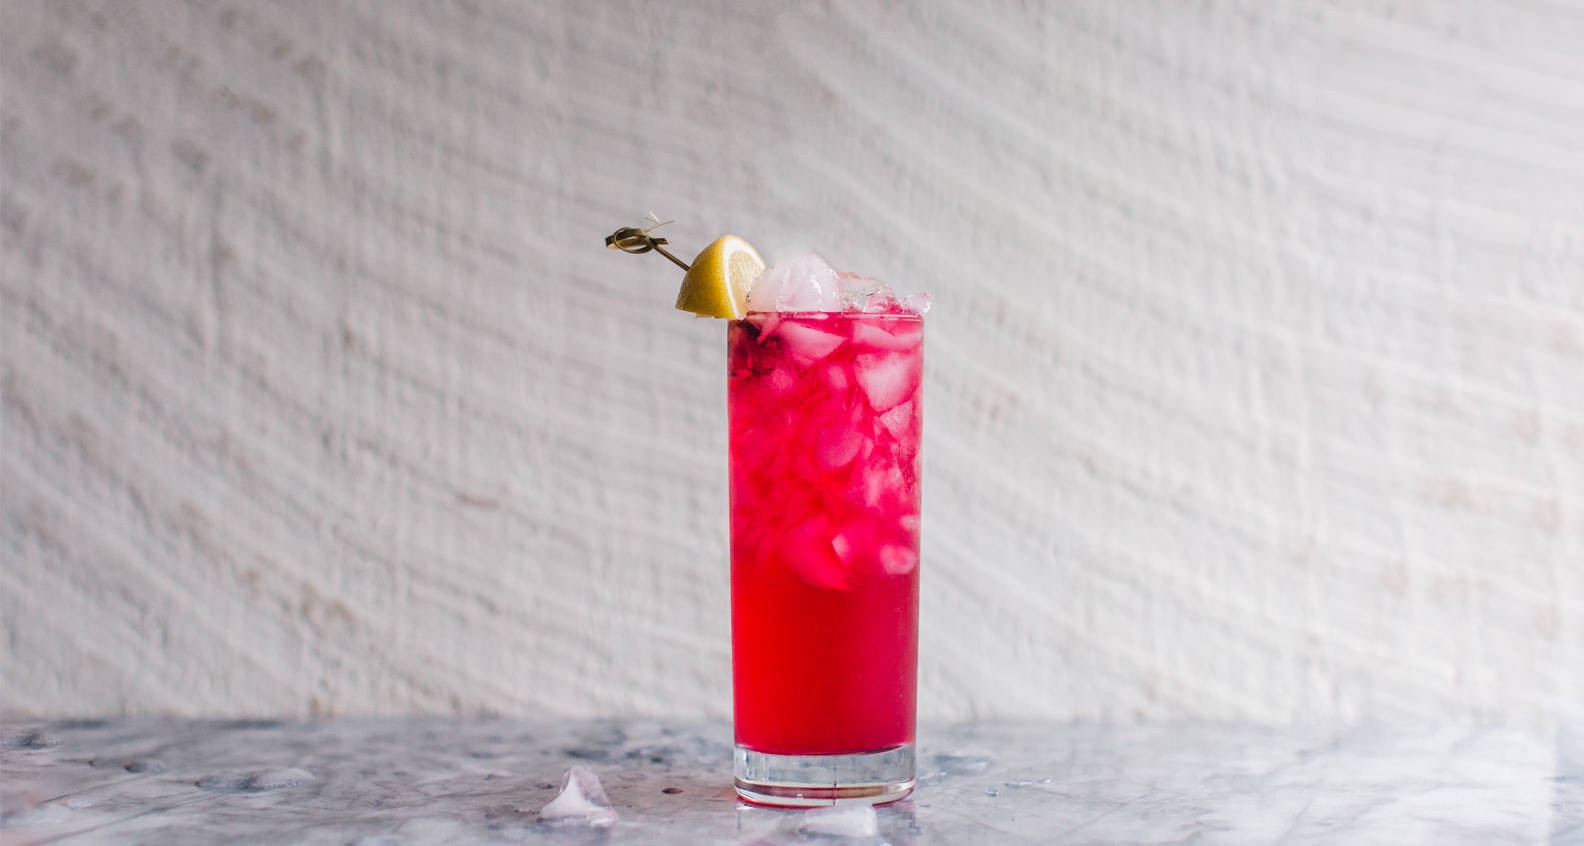 Southern Kitchen Shares How to Make the Perfect Derby Cocktails